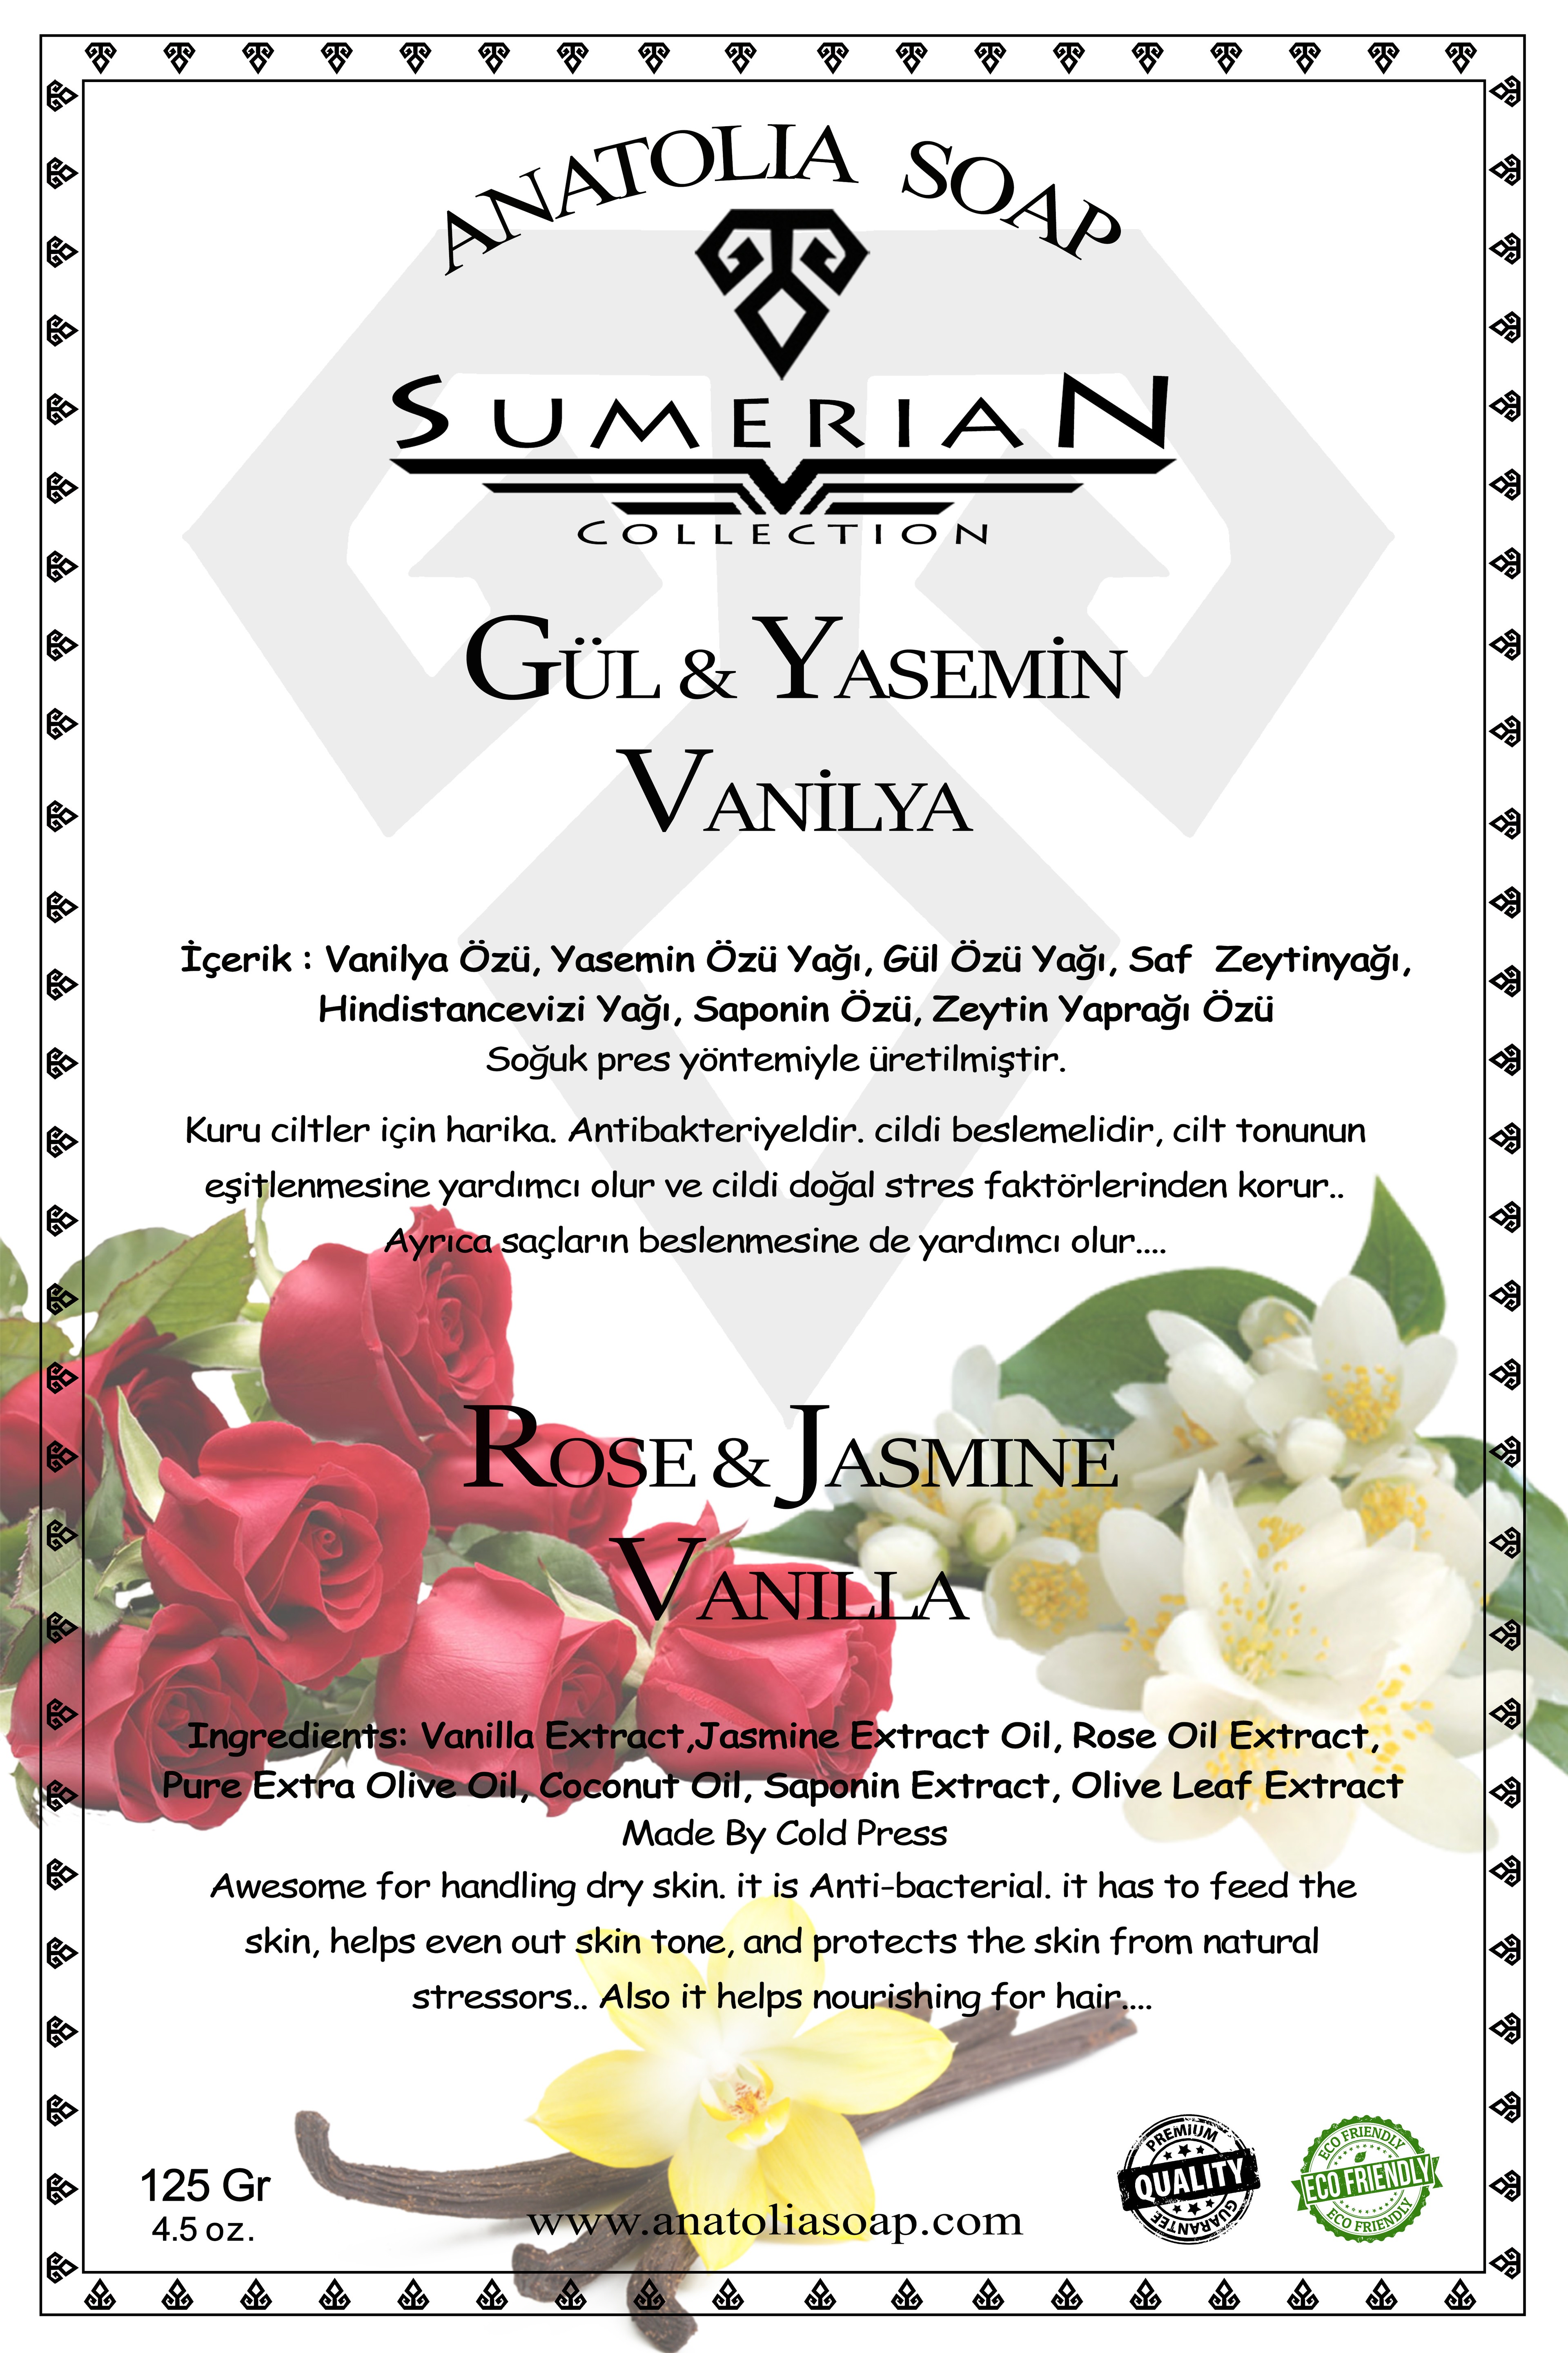 Sumerian Collection Rose Jasmine Vanilla Soap has Aromatherapy Features, is great for dry skin. It is a natural moisturizer.